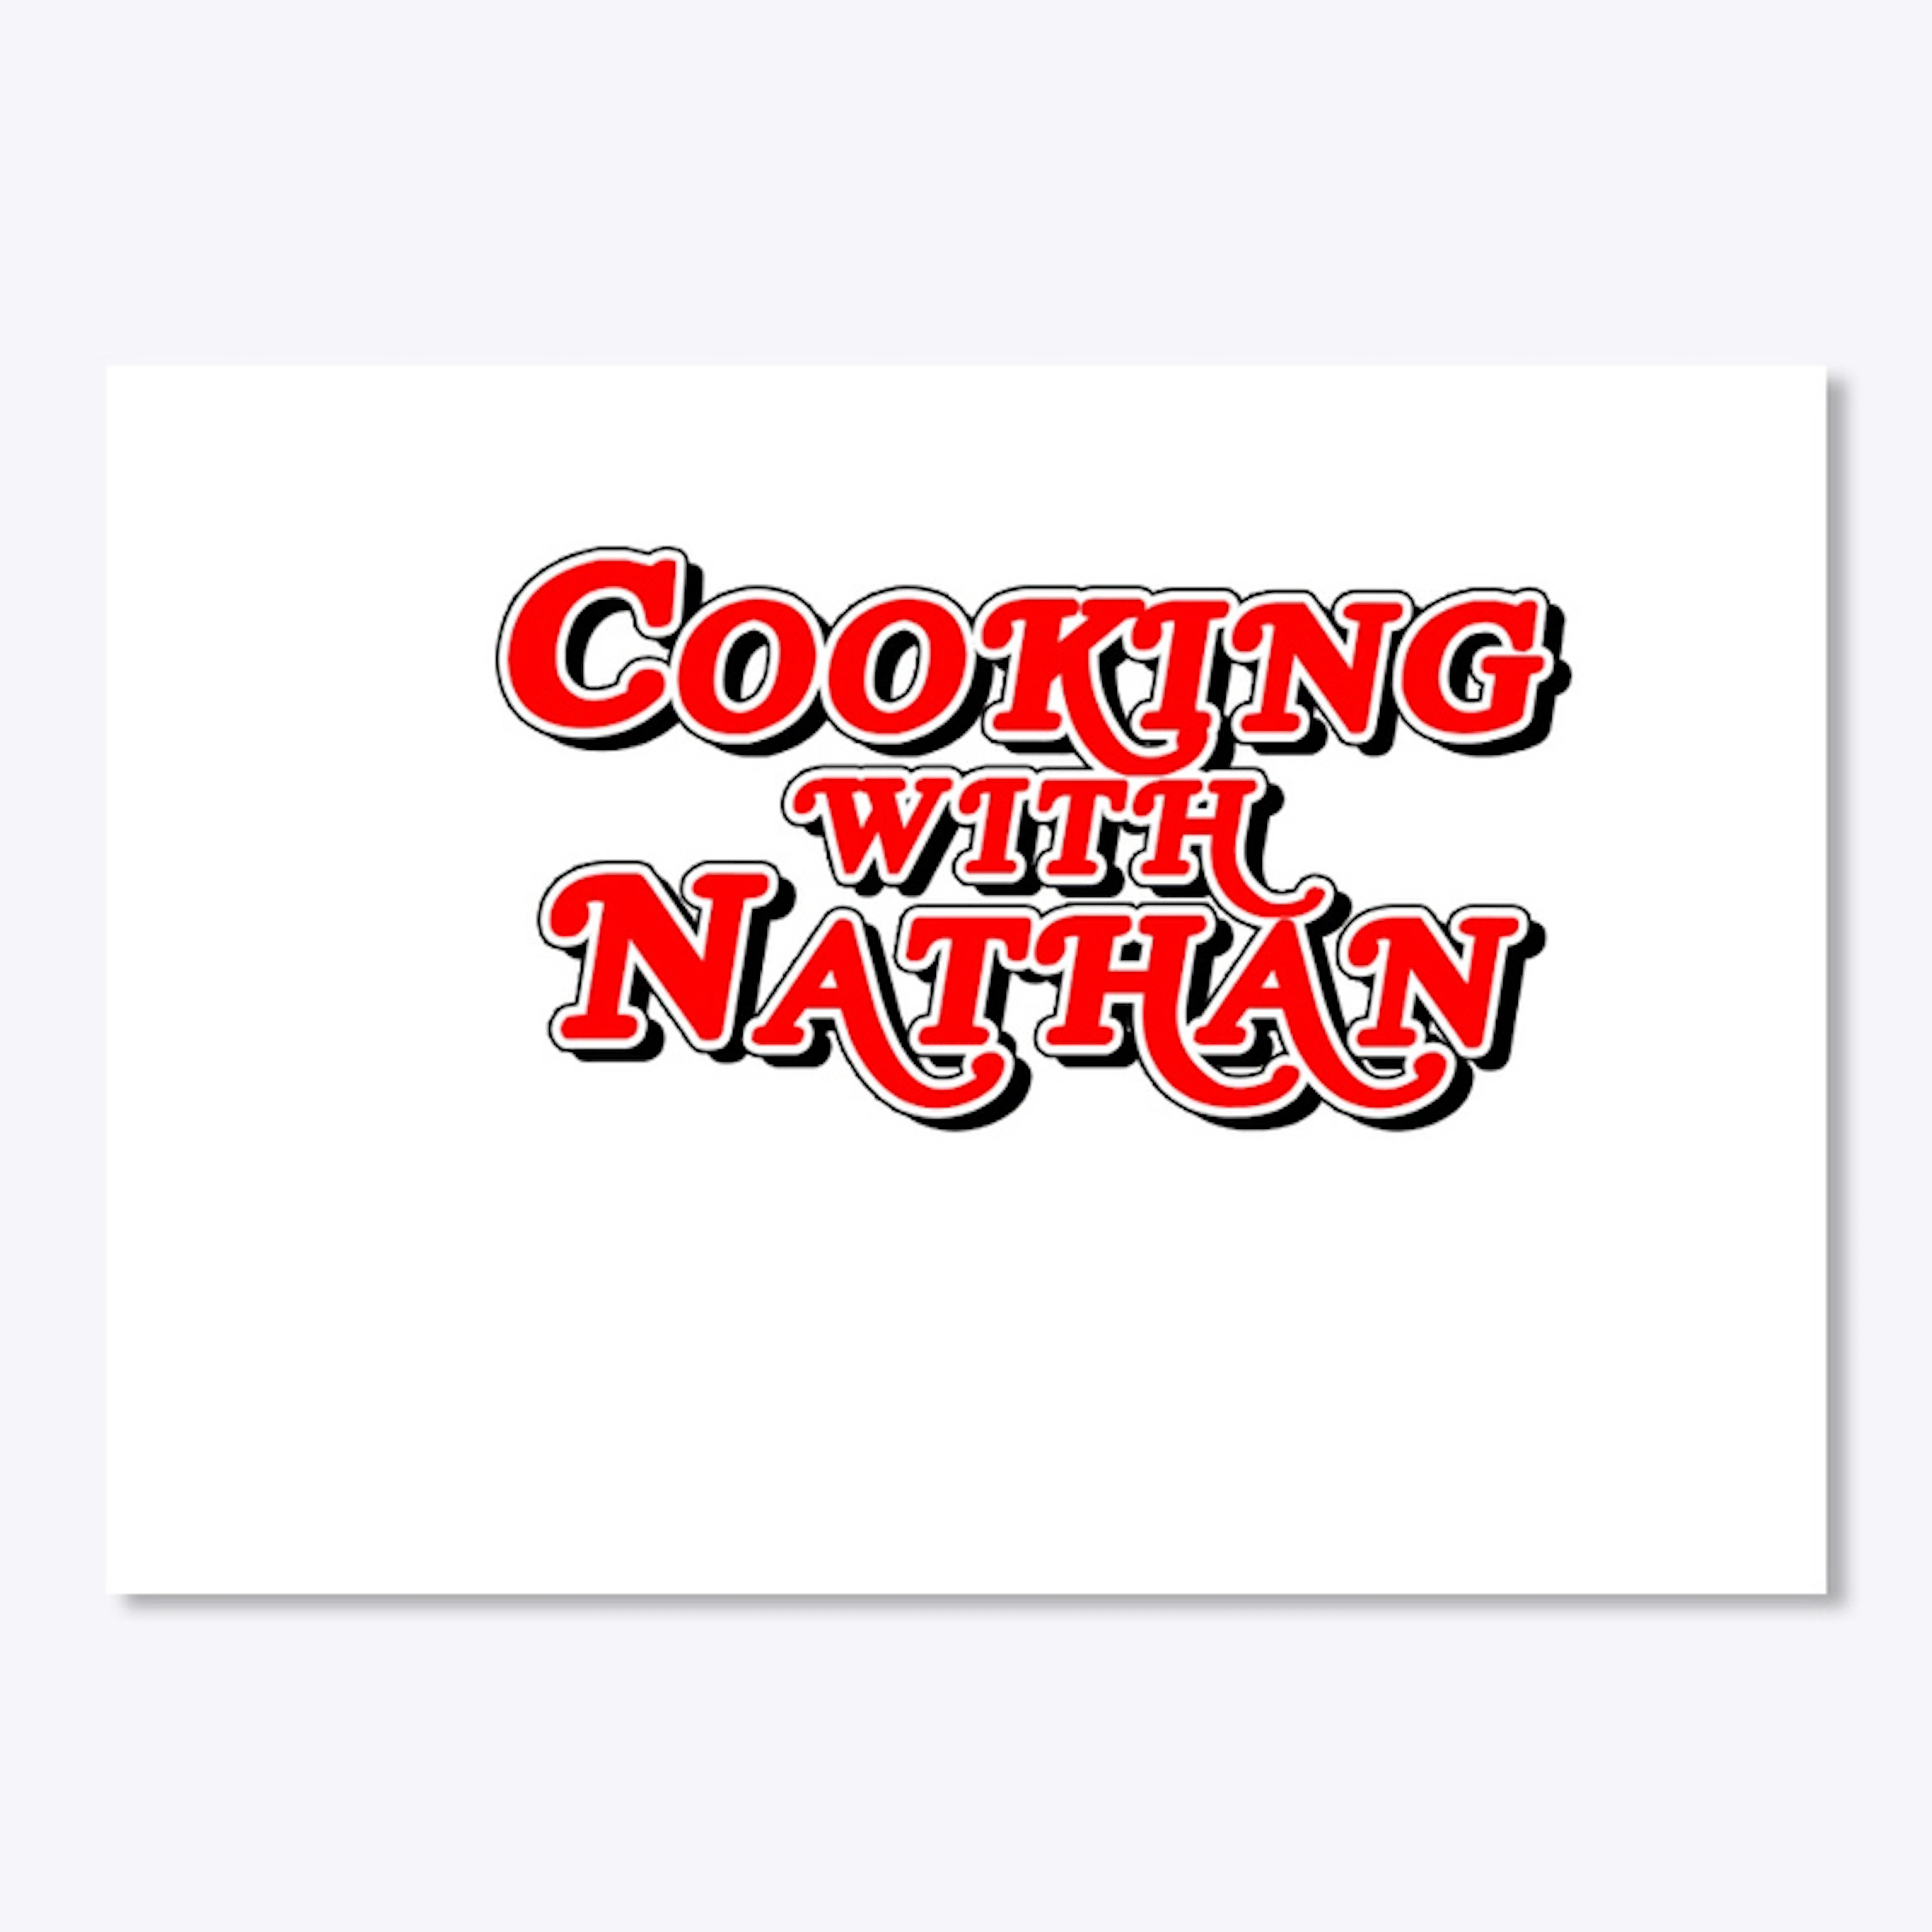 School of Rock Cooking with Nathan Logo